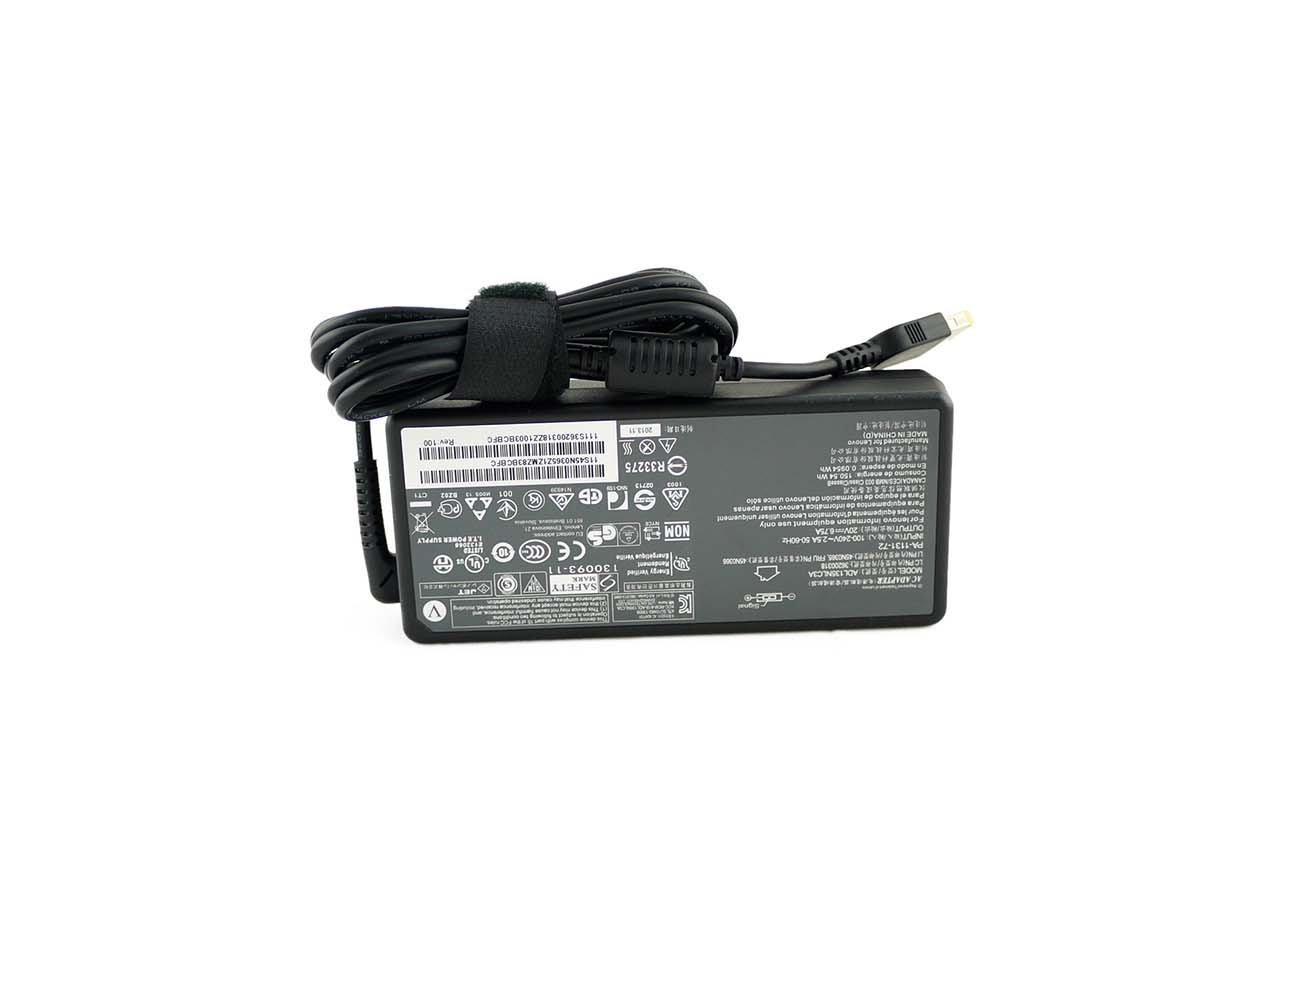 Lenovo AC Adapter, Battery Charger, Power Supply for Lenovo ADL135NDC3A 36200605 45N0361 45N0501 20V 6.75A 135W With